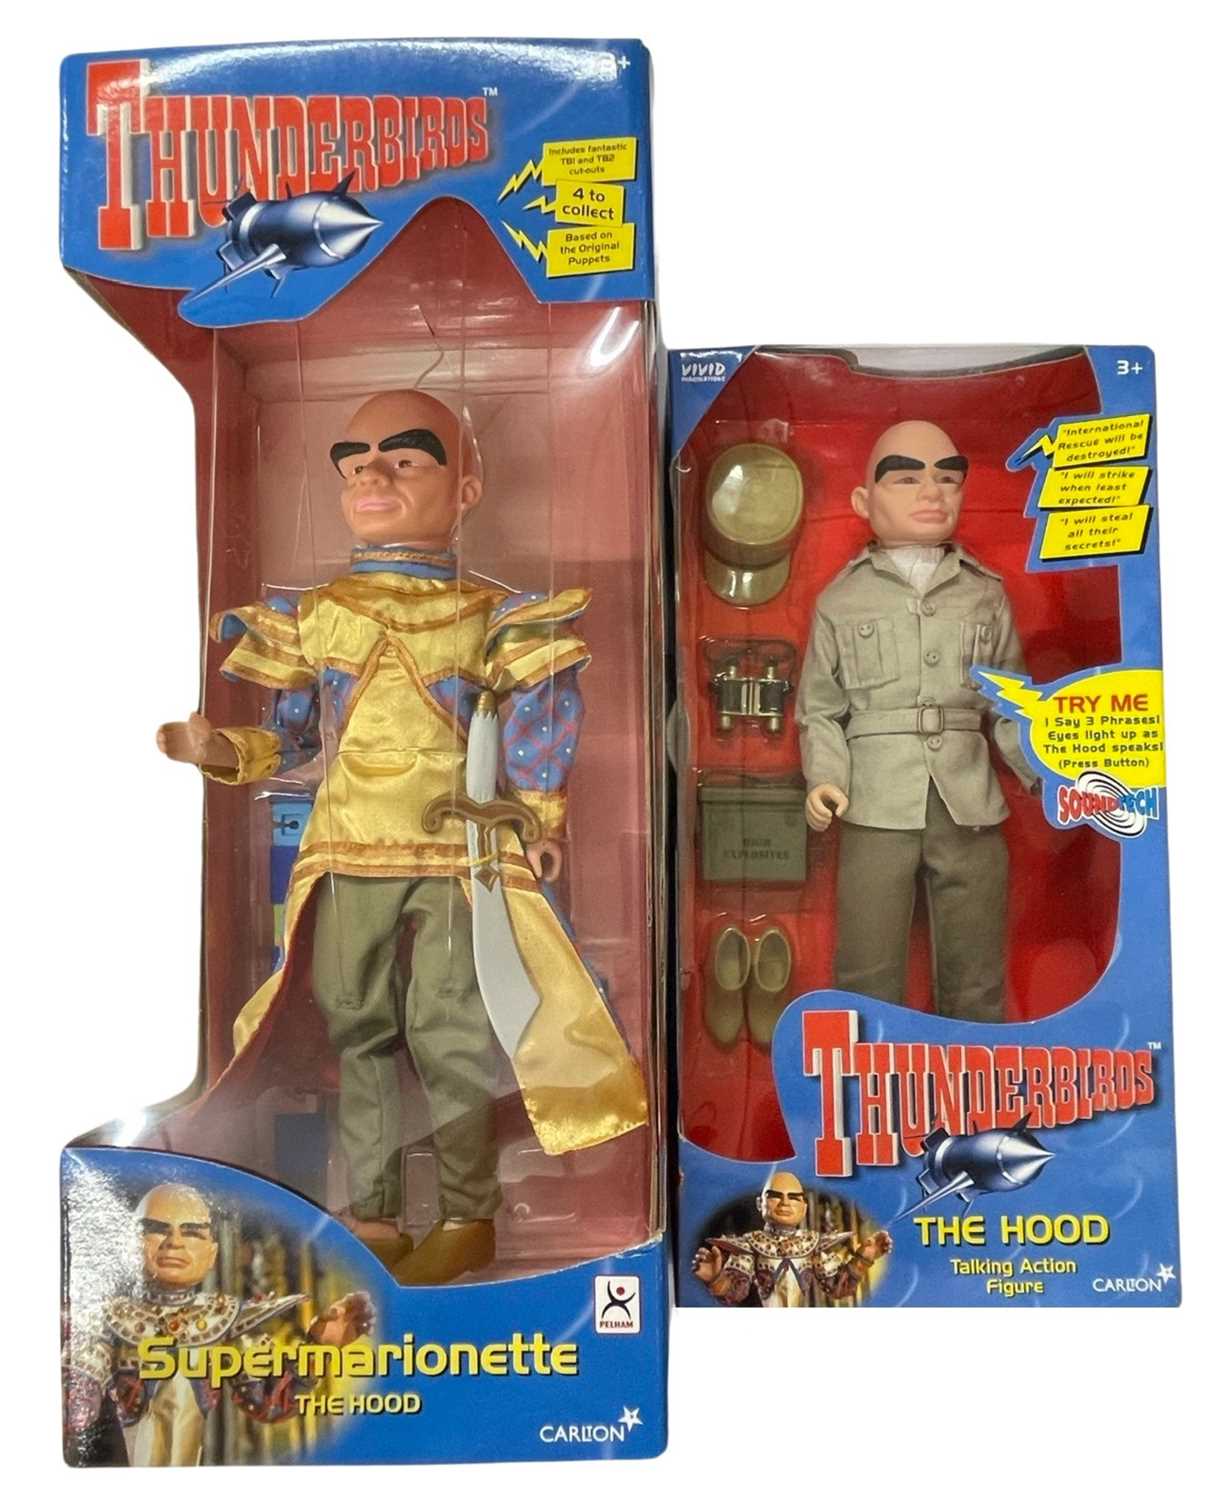 A boxed Thunderbirds marionette puppet of The Hood, together with a boxed action figure.